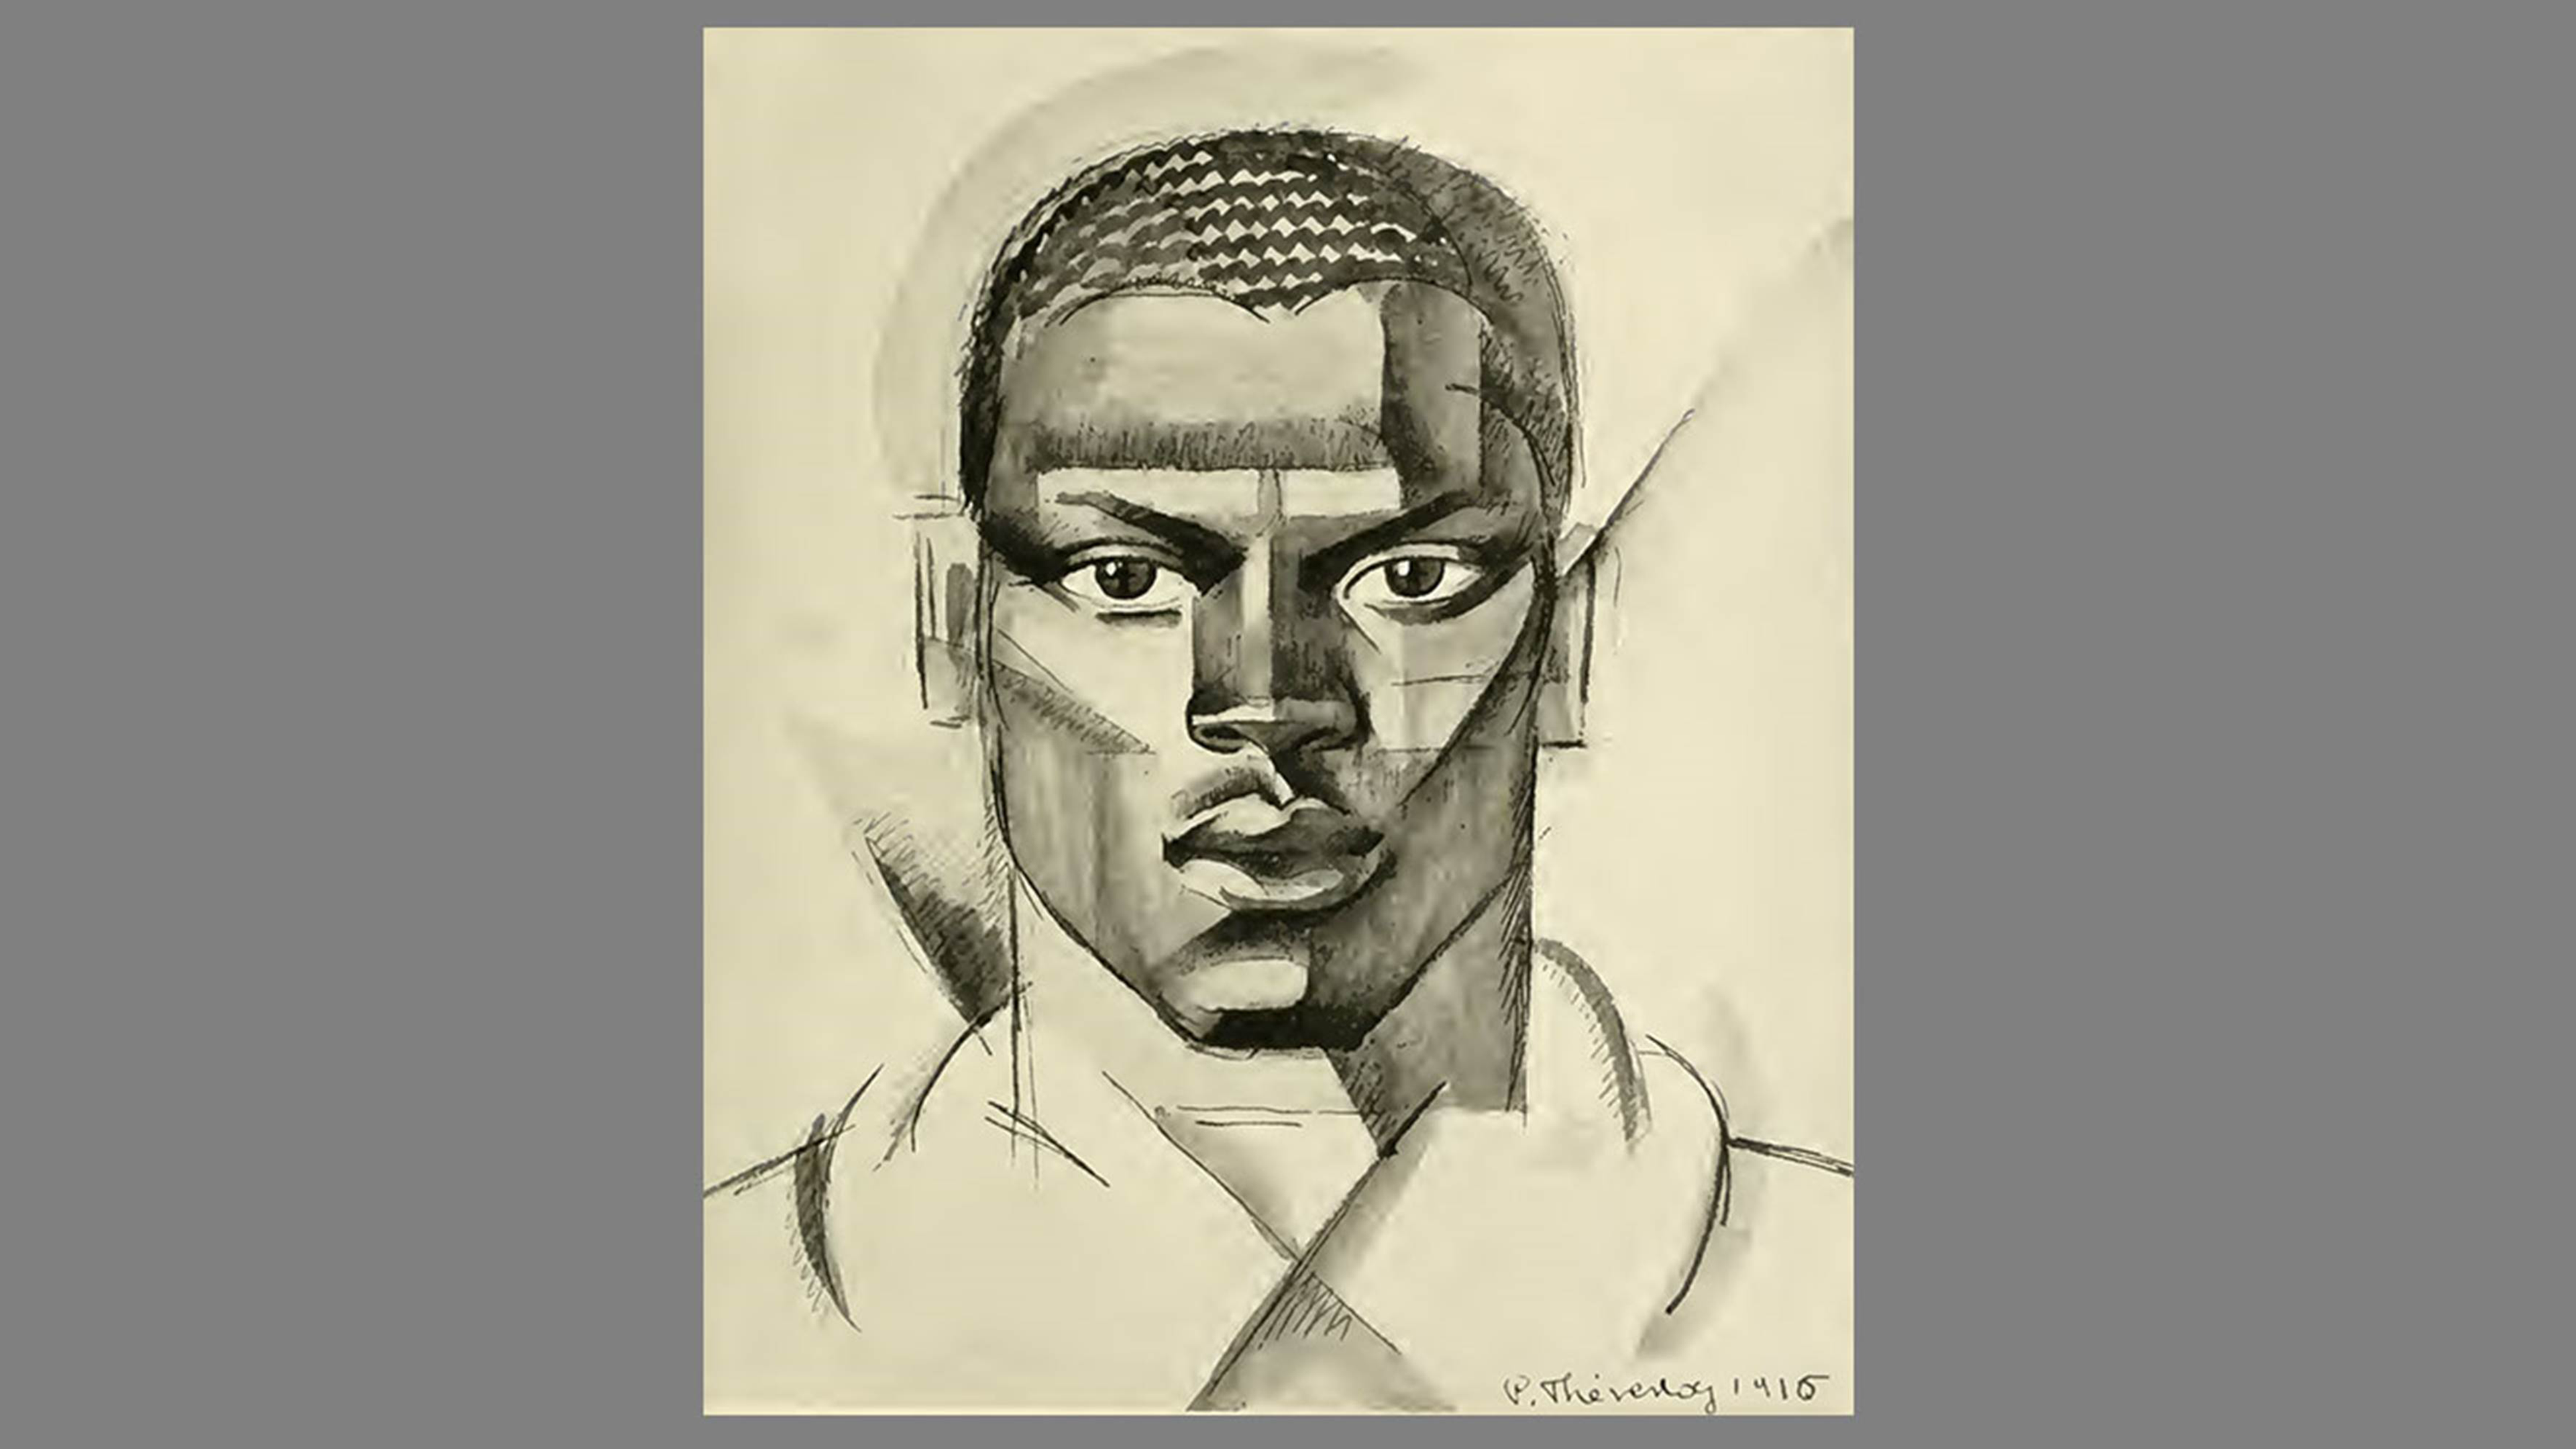 A charcoal drawing of a young Black man.